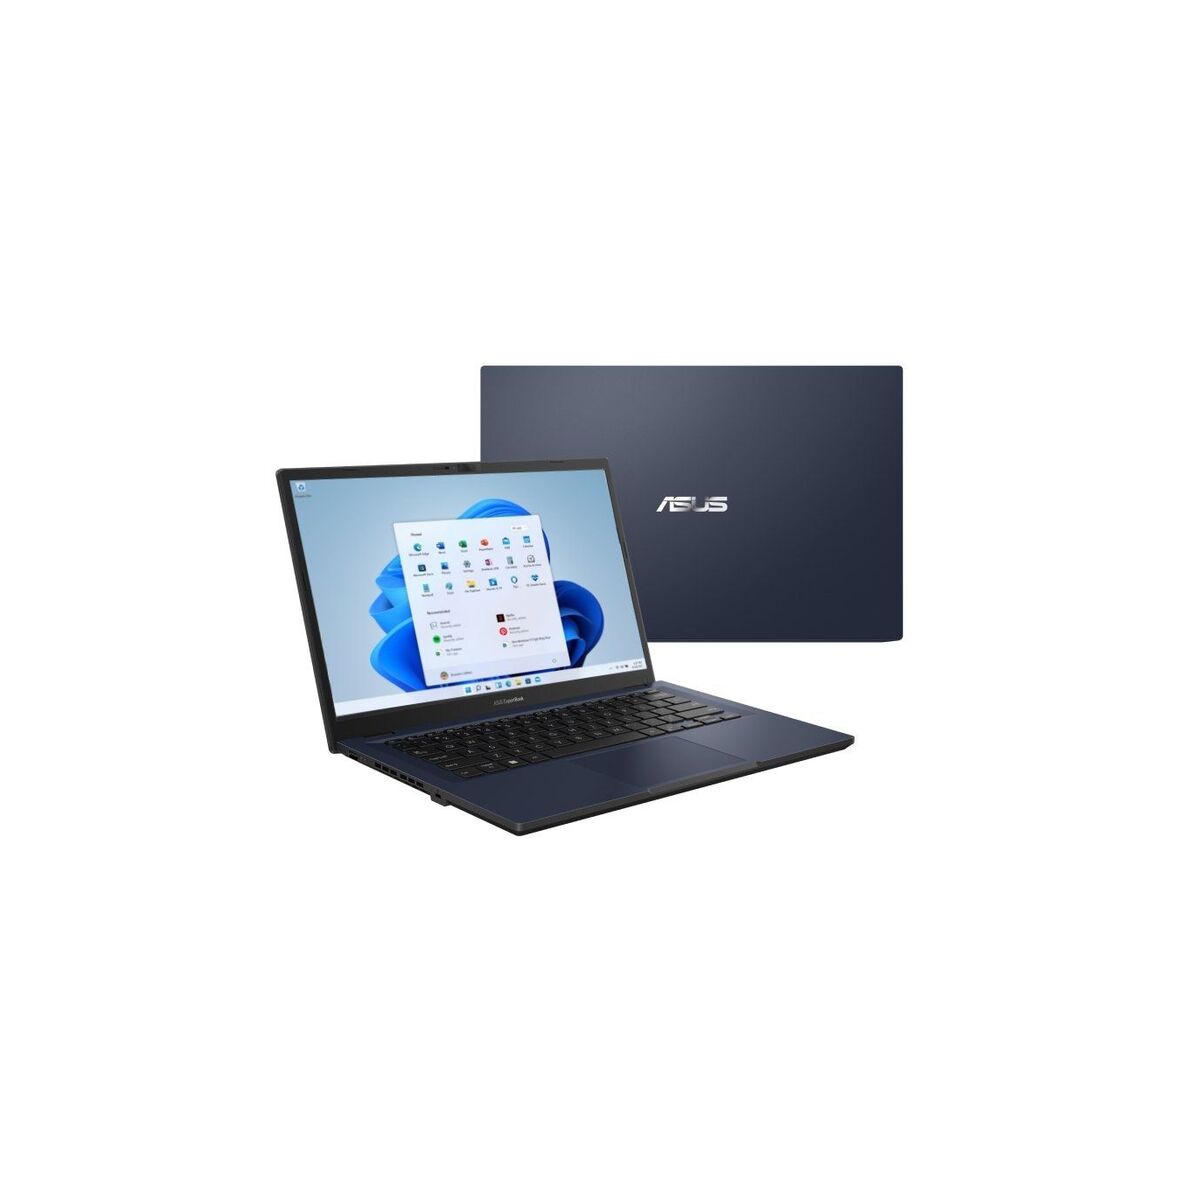 Laptop Asus ExpertBook B1 14" Intel Core i7 Intel Core i7-1355U 16 GB RAM 512 GB SSD Spanish Qwerty, Asus, Computing, laptop-asus-expertbook-b1-14-intel-core-i7-intel-core-i7-1355u-16-gb-ram-512-gb-ssd-spanish-qwerty, Brand_Asus, category-reference-2609, category-reference-2791, category-reference-2797, category-reference-t-19685, category-reference-t-19904, Condition_NEW, office, Price_900 - 1000, Teleworking, RiotNook